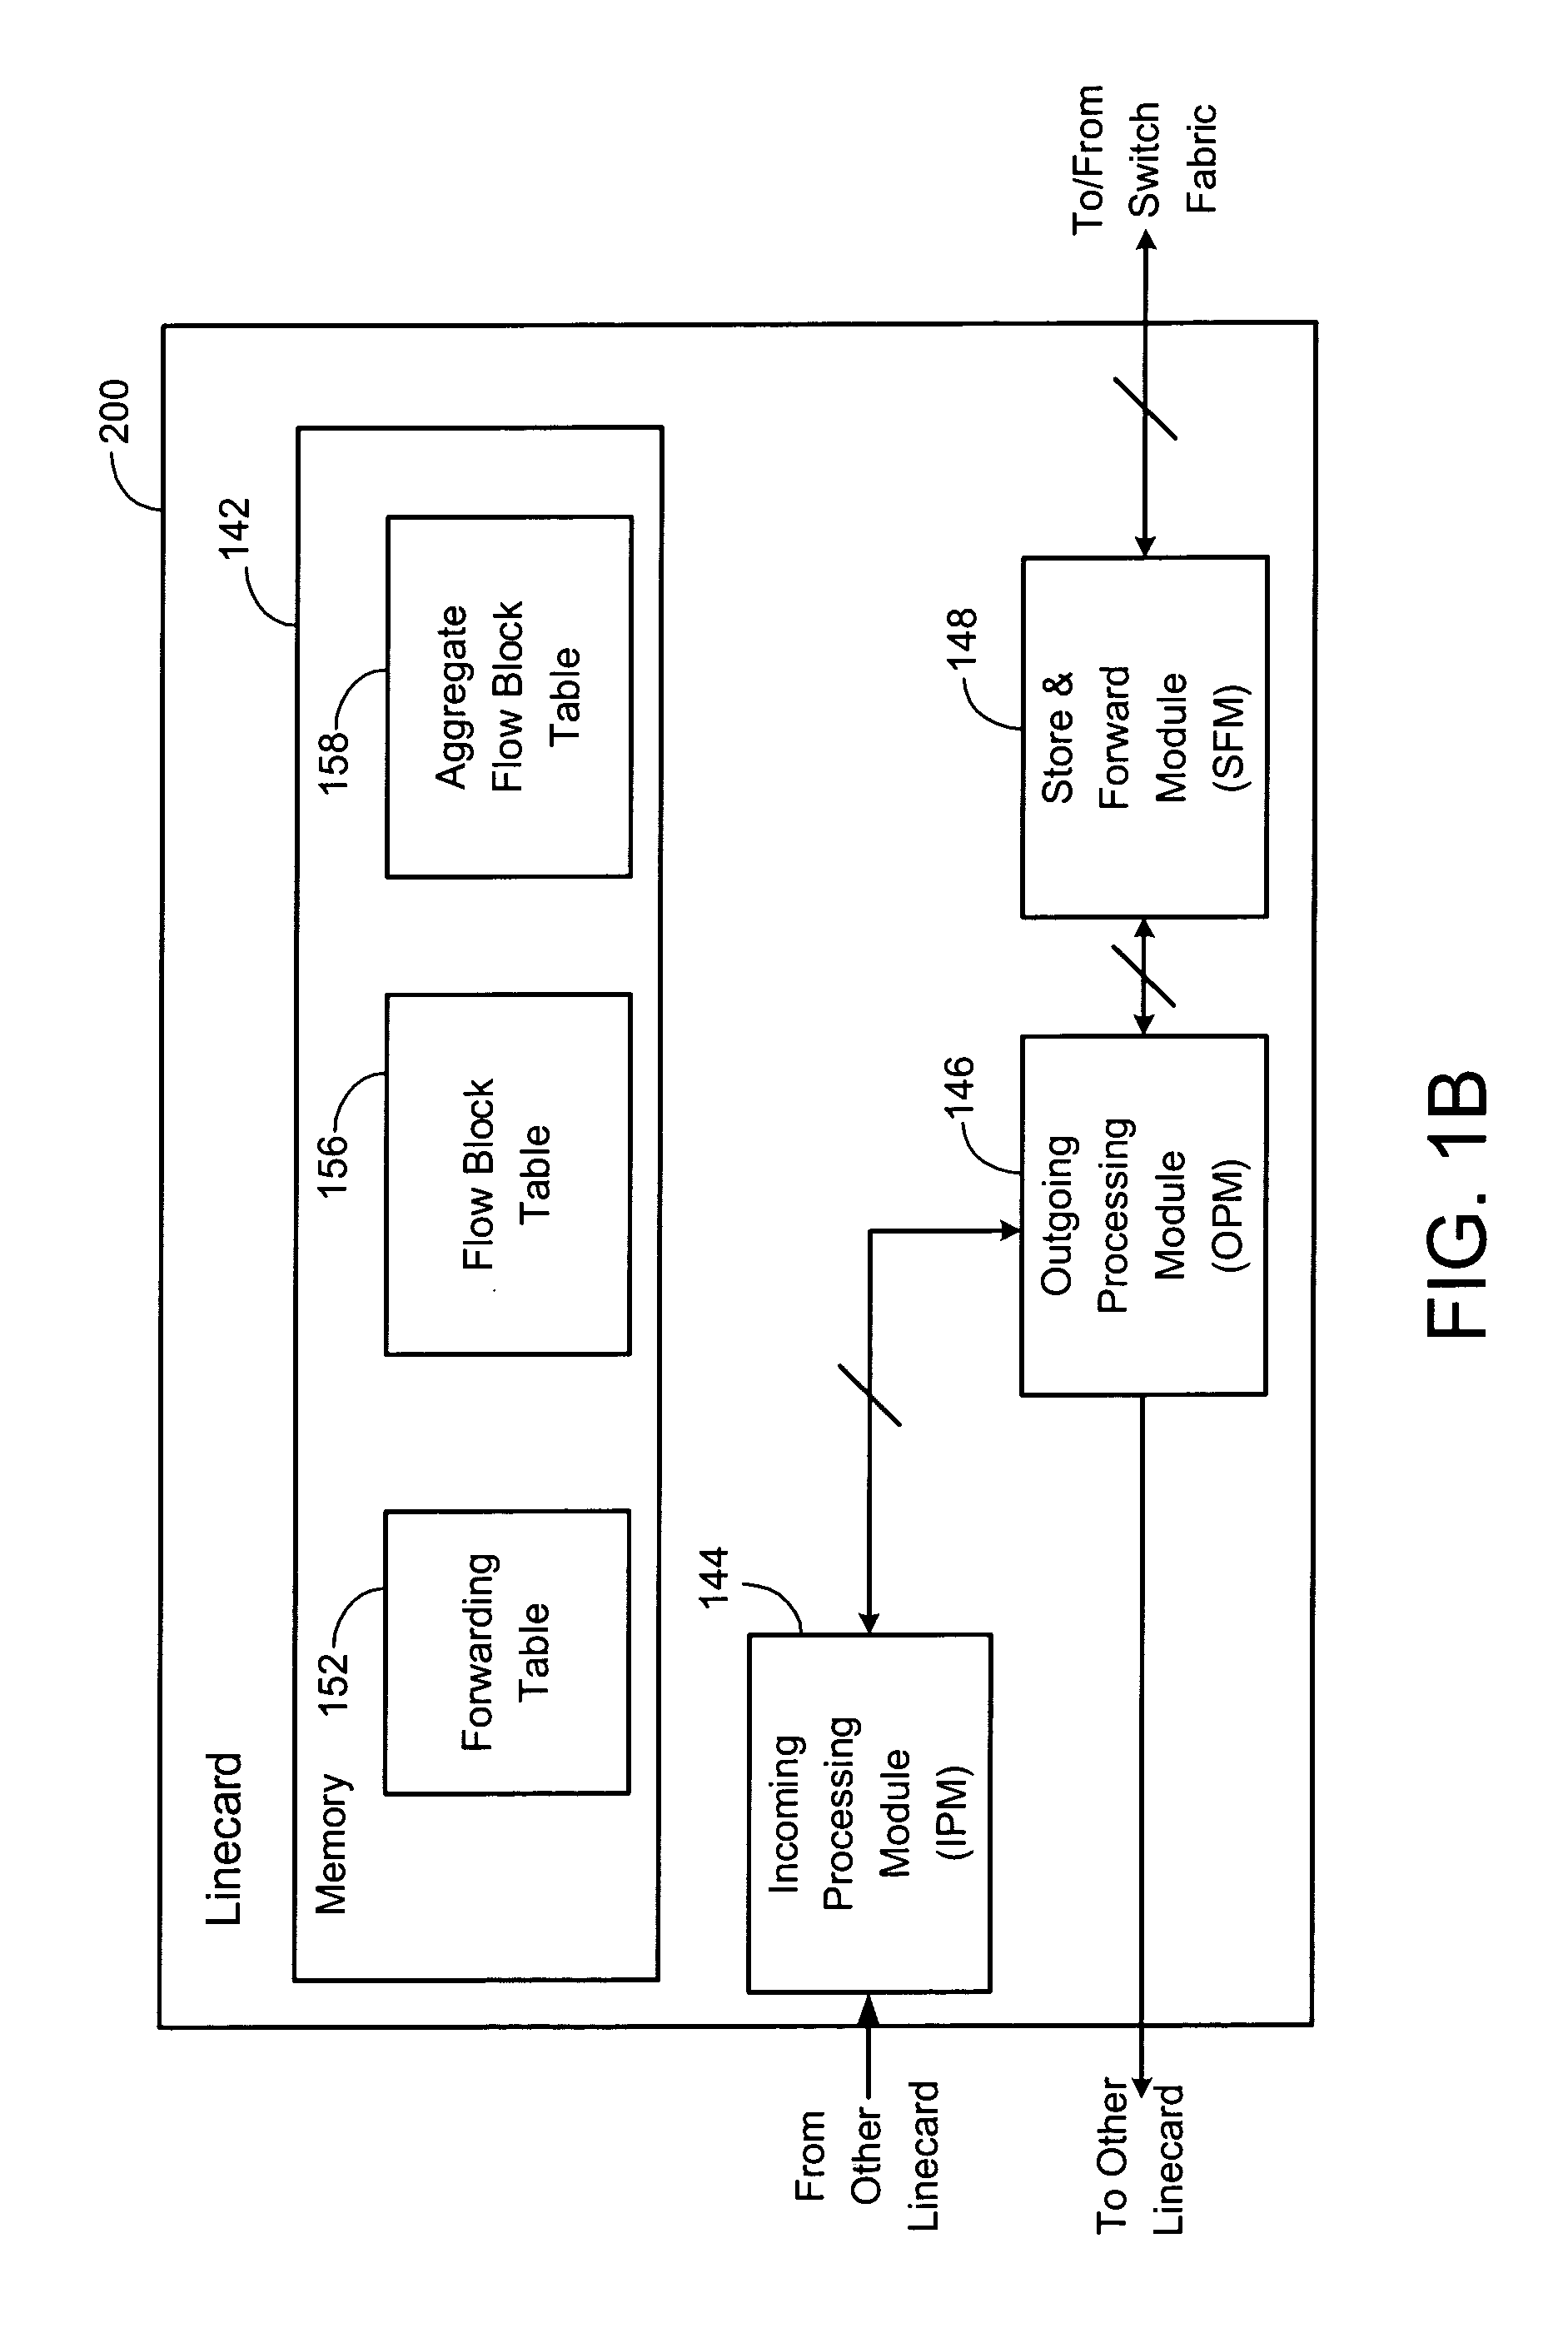 System and method for network tunneling utilizing micro-flow state information